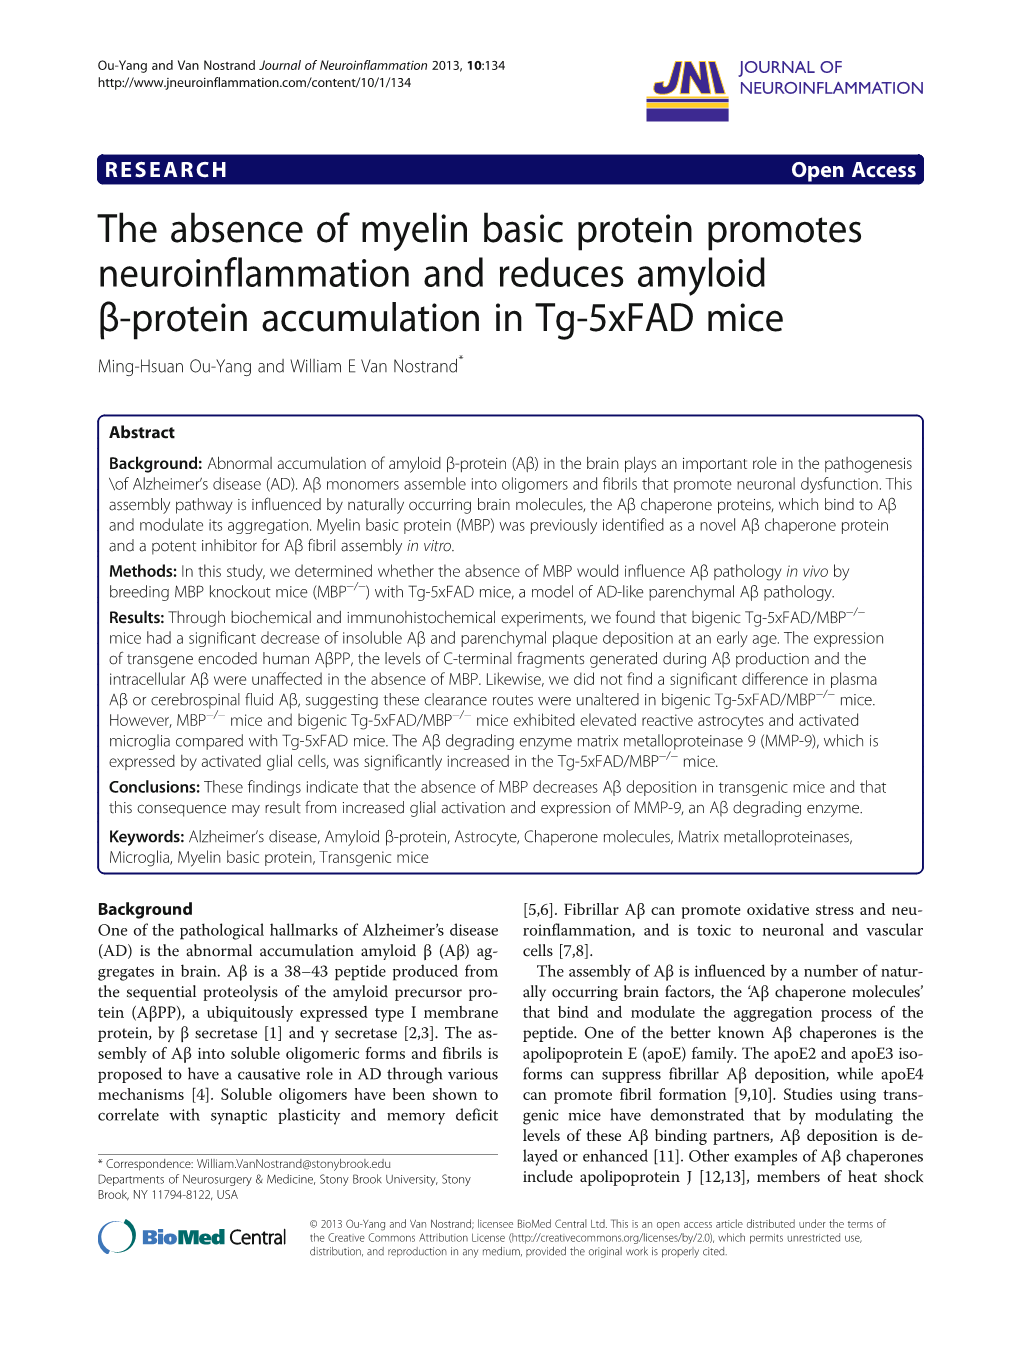 The Absence of Myelin Basic Protein Promotes Neuroinflammation And